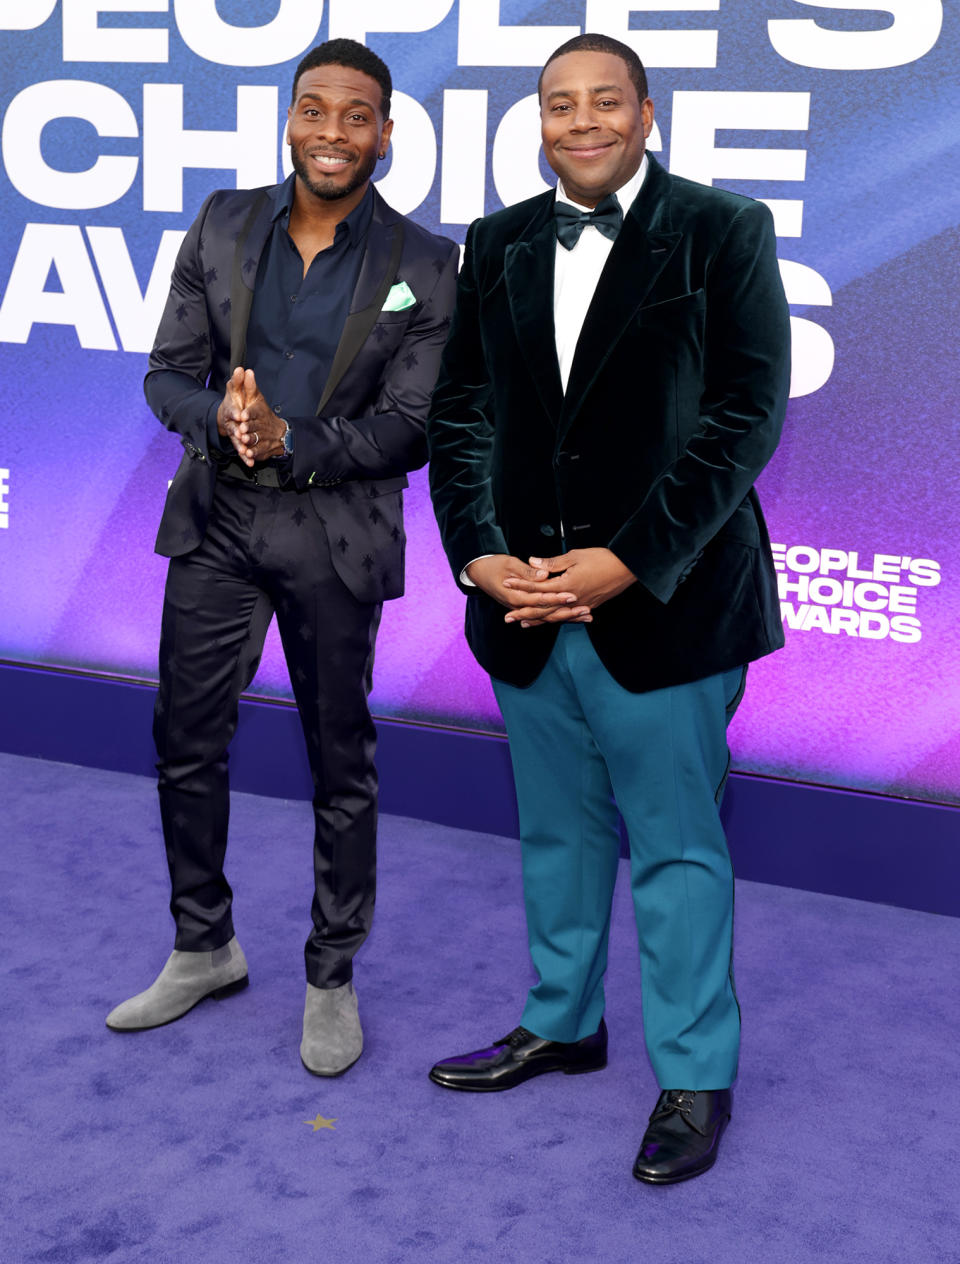 <p>Kenan Thompson and Kel Mitchell get the band back together on the carpet at the show wearing coordinated suits. Mitchell opts for matching jacket and trousers while Thompson goes for teal trousers and a velvet green jacket. </p>